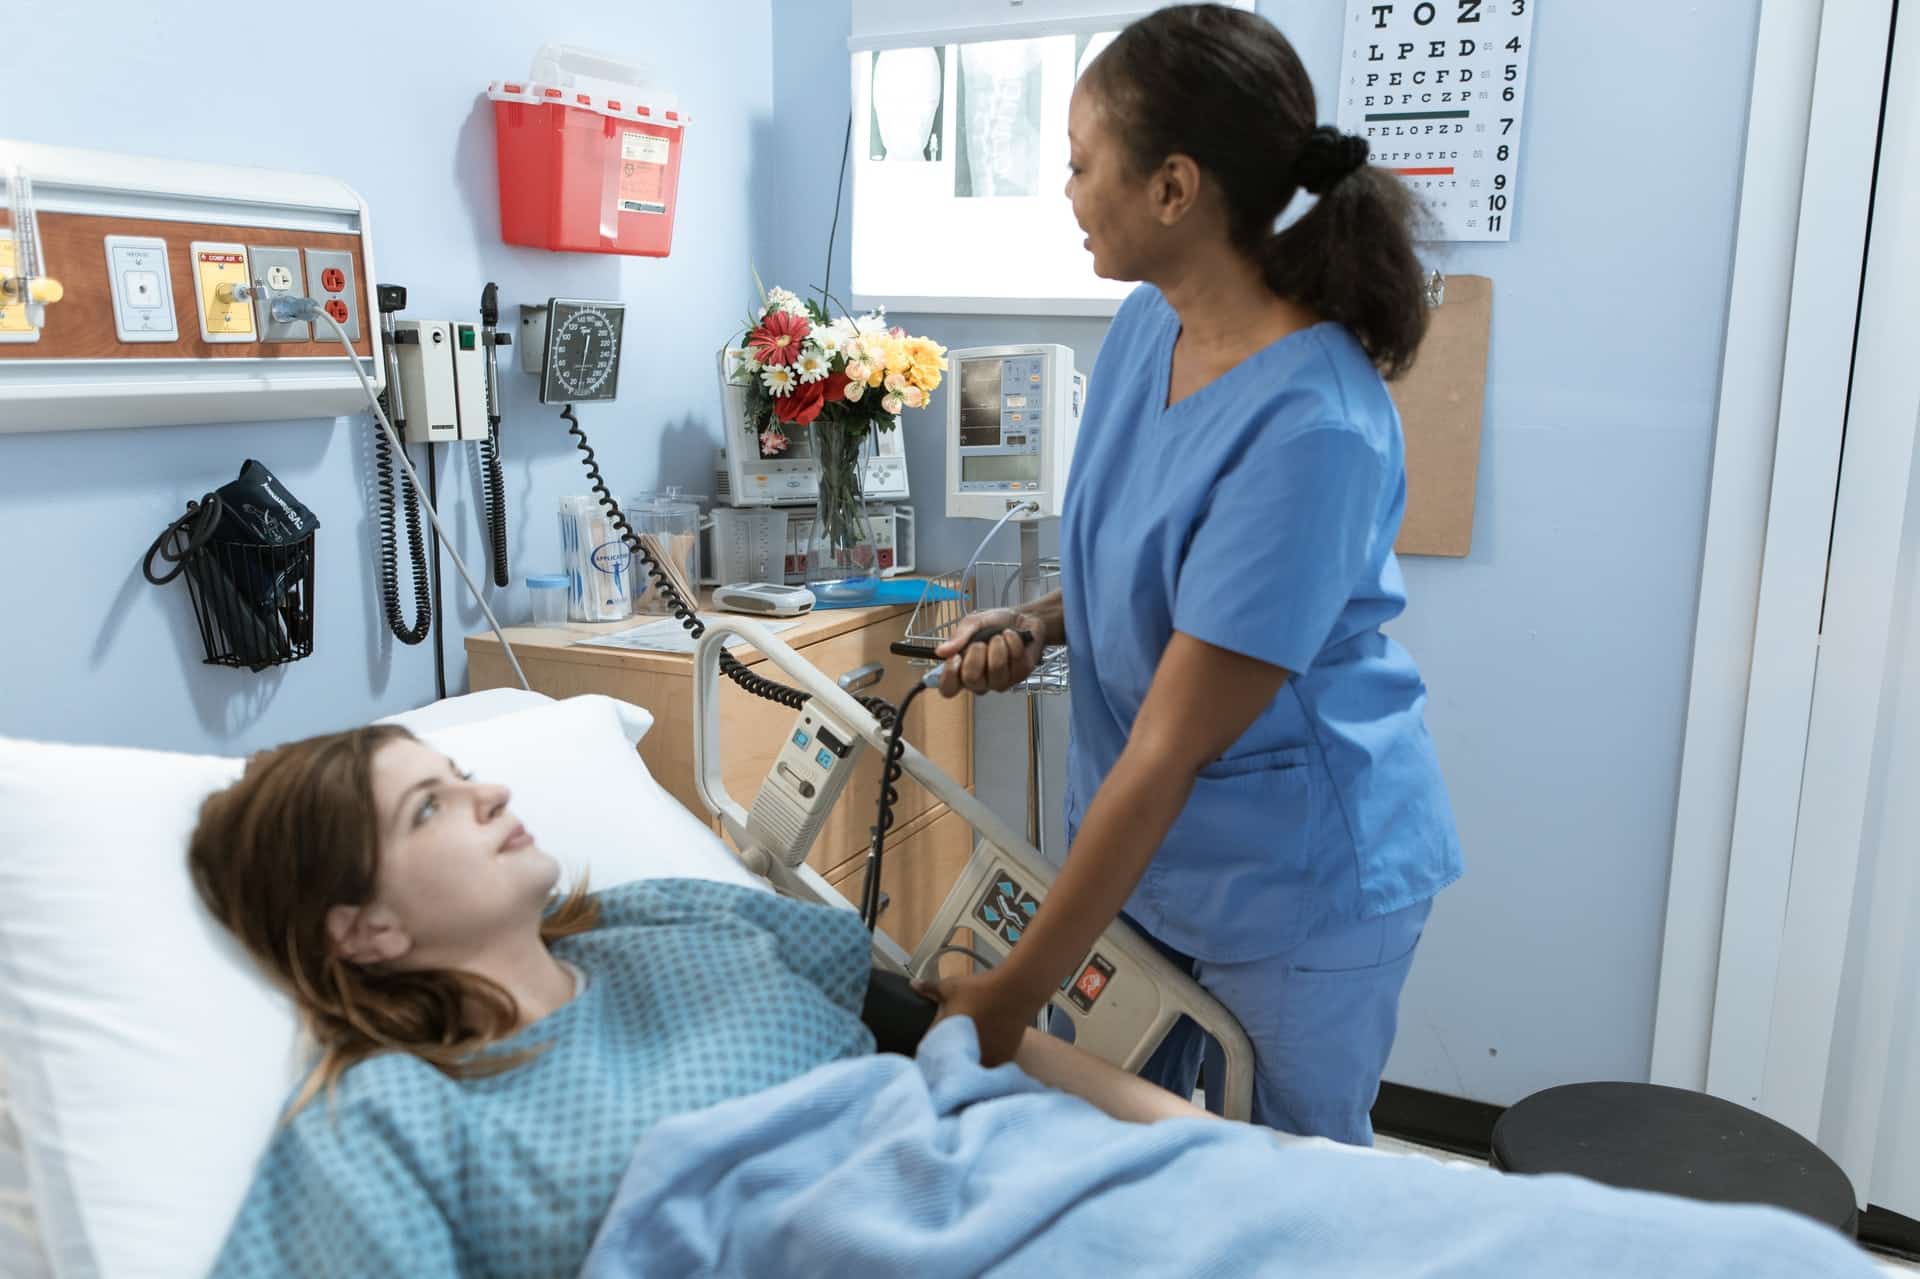 a white female patient in a hospital bed has her blood pressure checked by a black nurse wearing blue scrubs